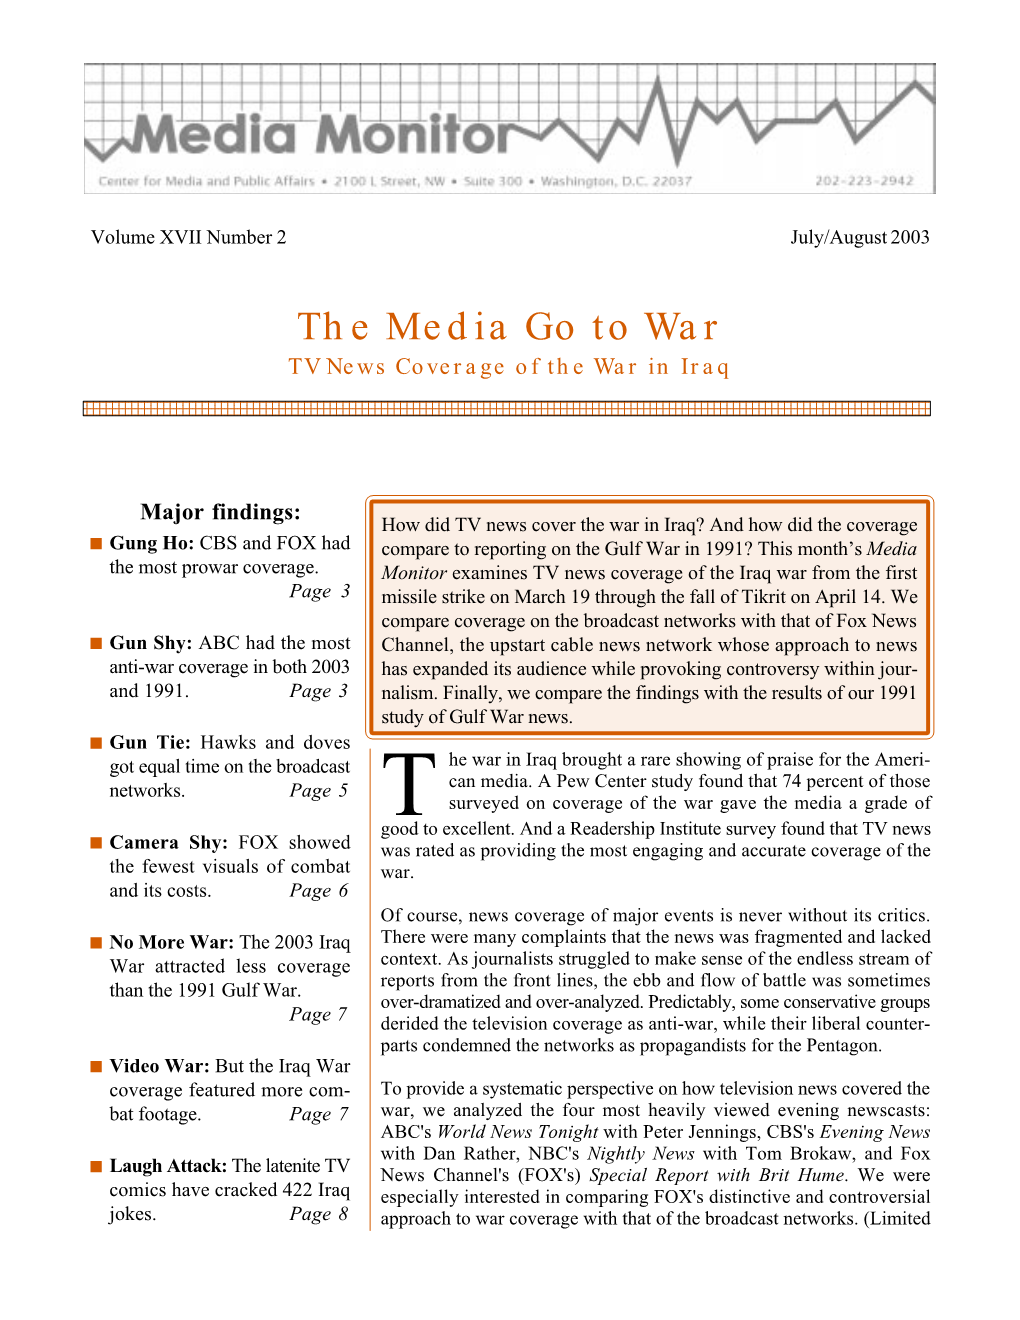 TV News Coverage of the War in Iraq